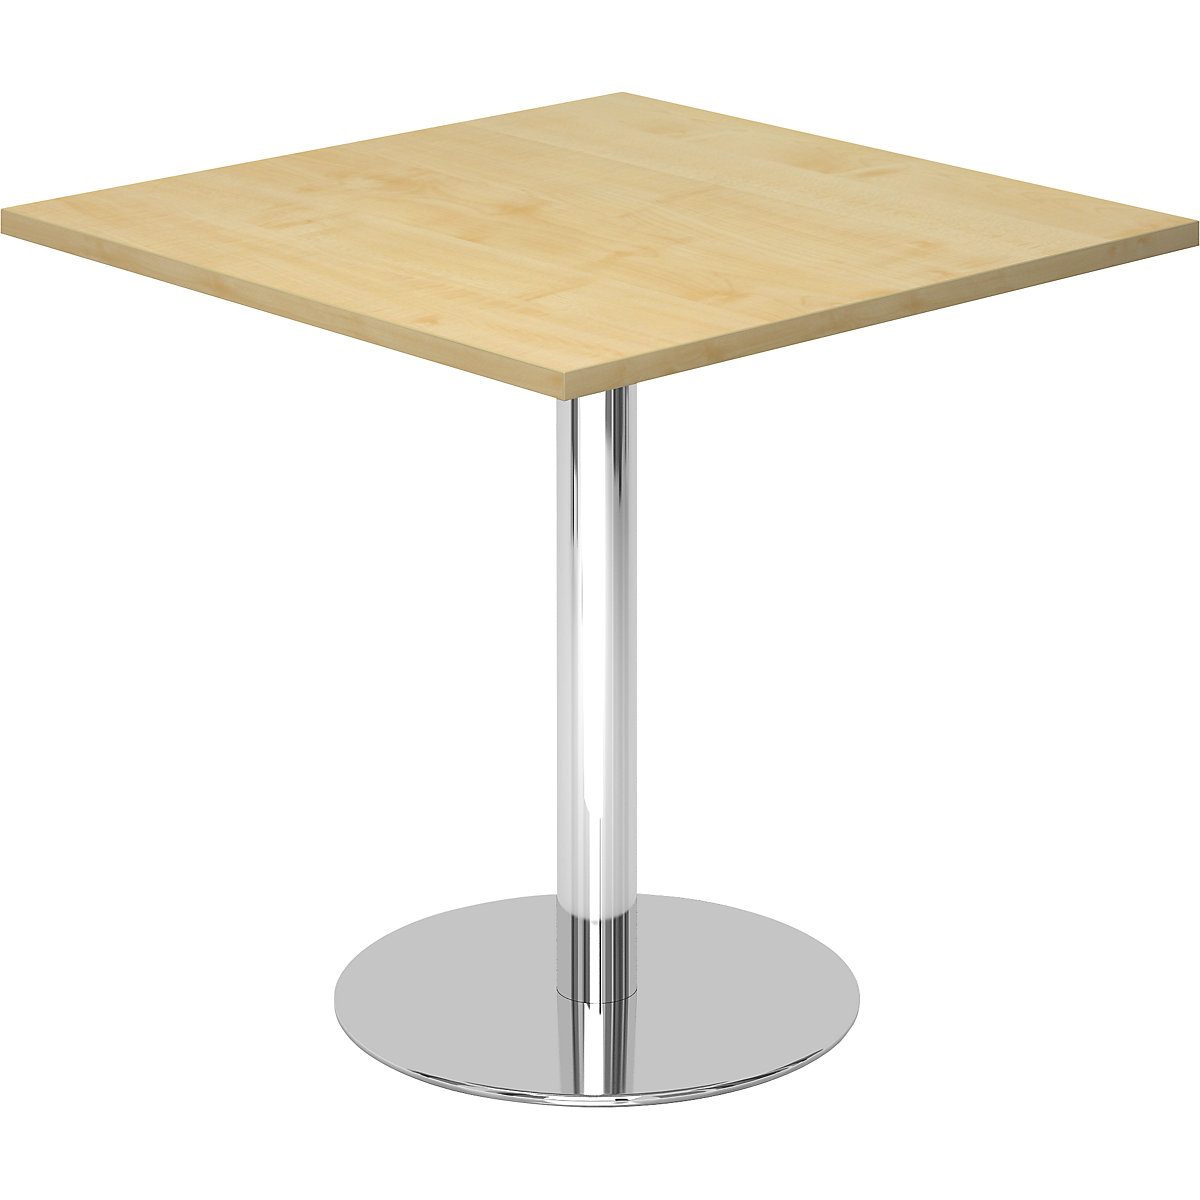 Conference table, LxW 800 x 800 mm, 755 mm high, chrome plated frame, tabletop in maple finish-5